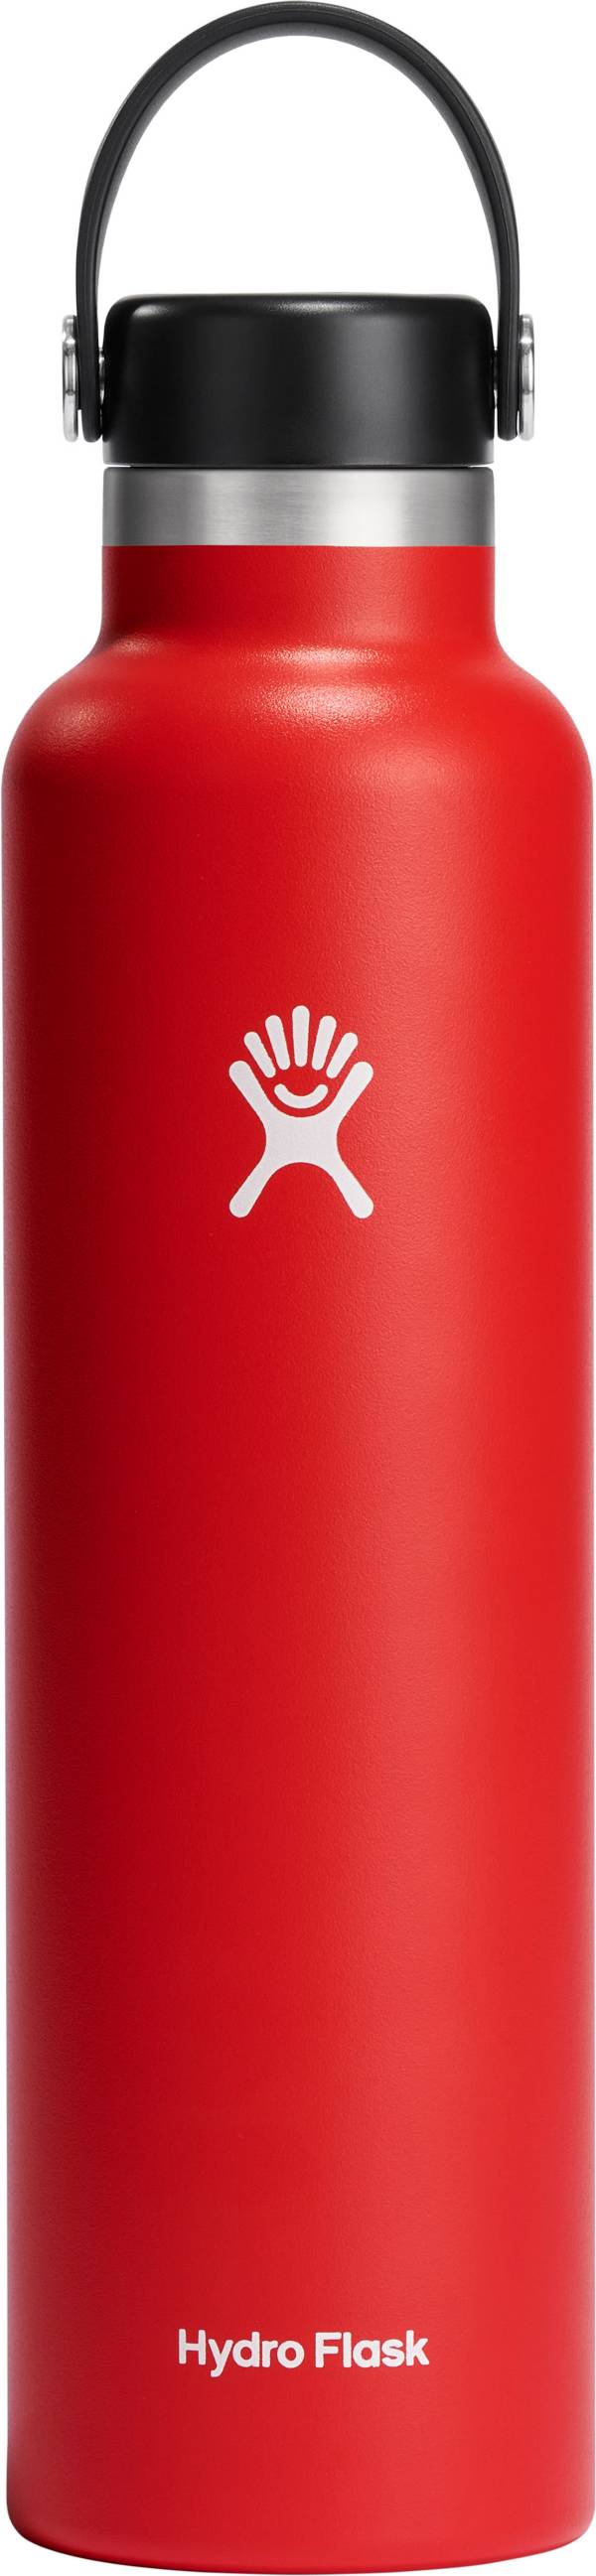 Hydro Flask 24 oz. Standard Mouth Bottle product image